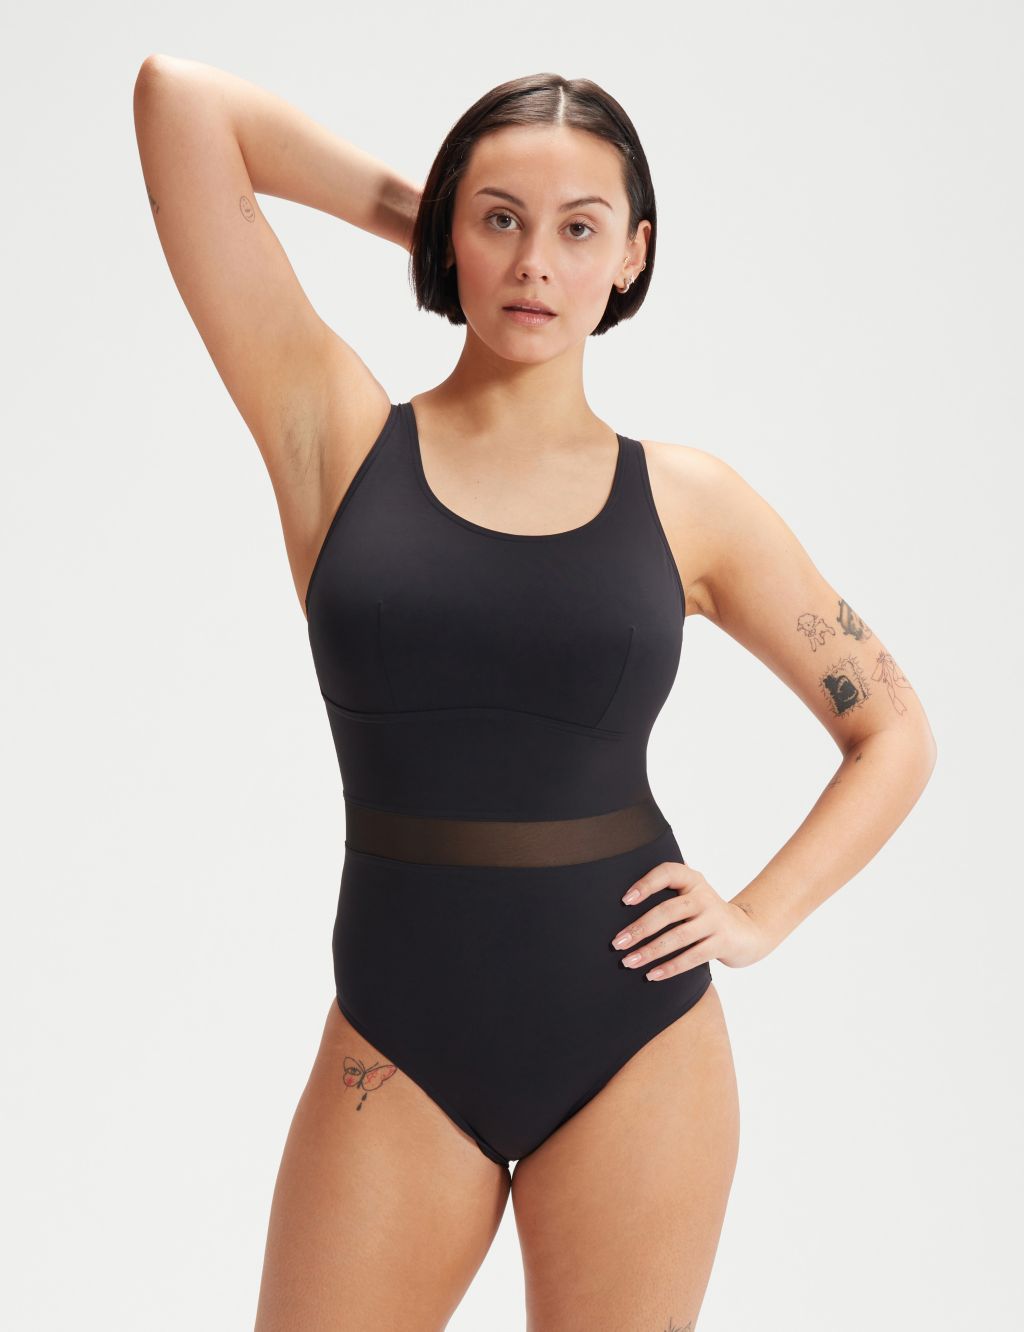 Luniaglow Scoop Neck Swimsuit image 1